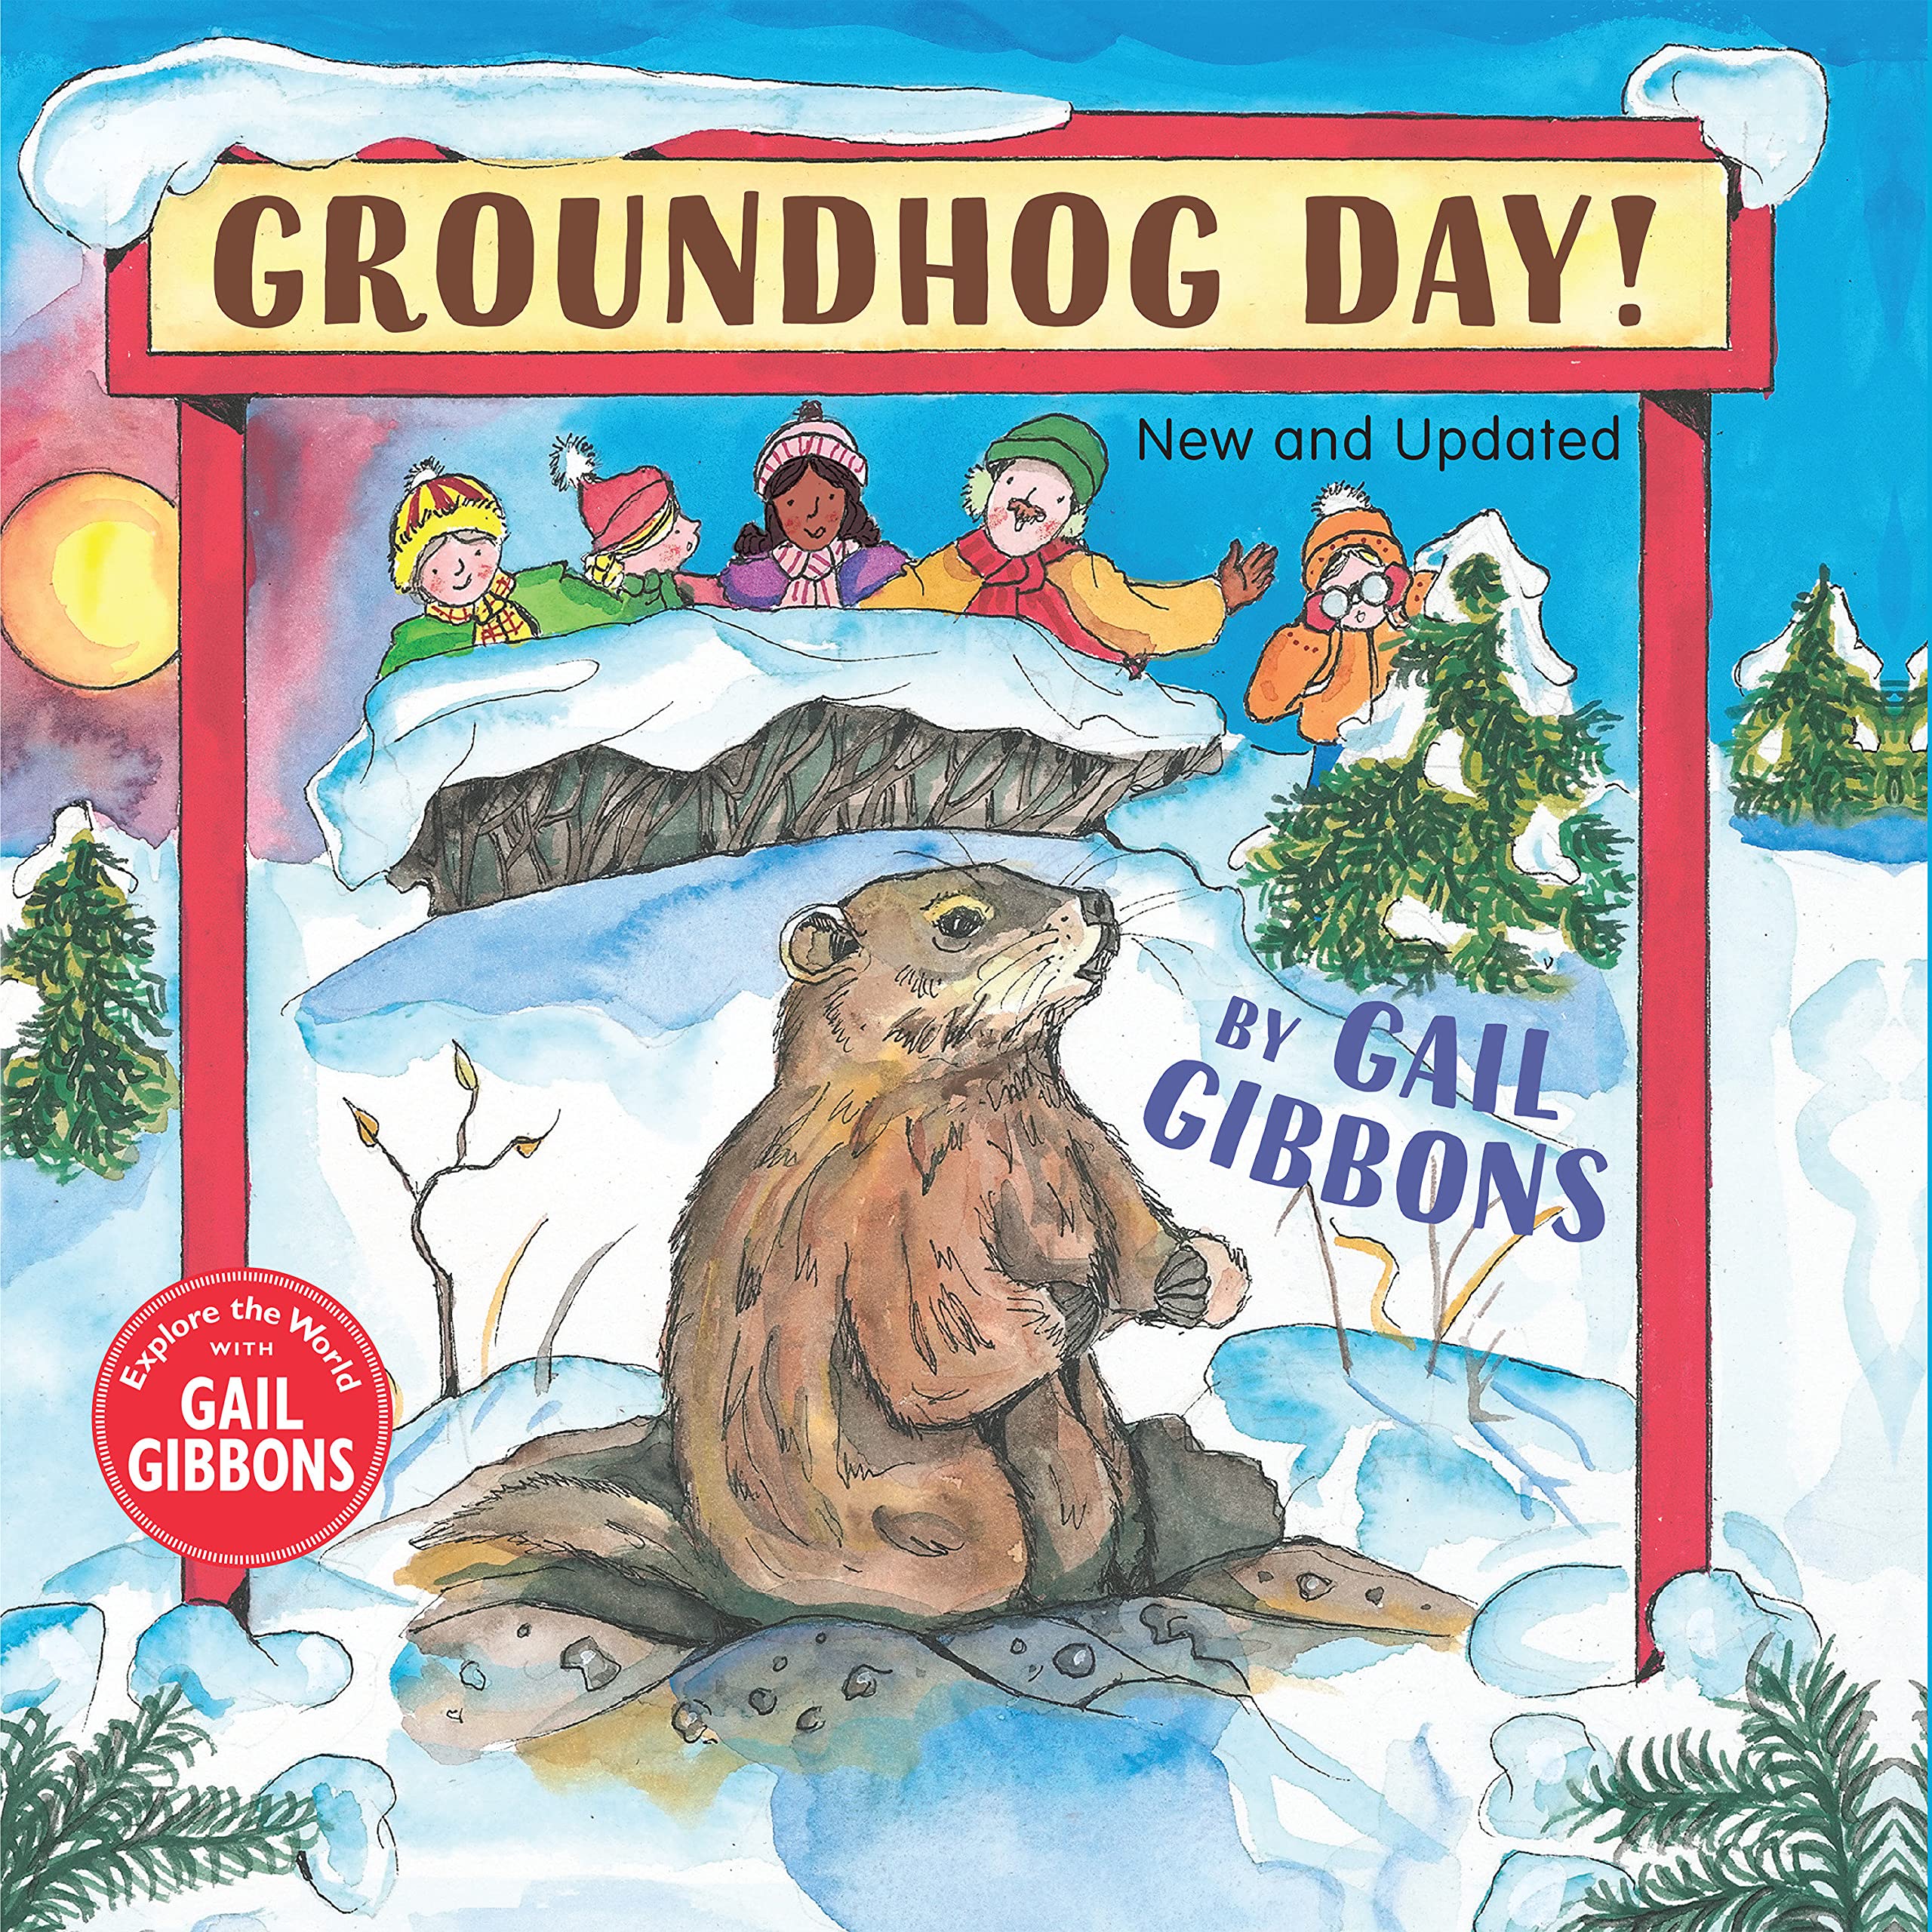 Groundhog Day! (New & Updated Edition)